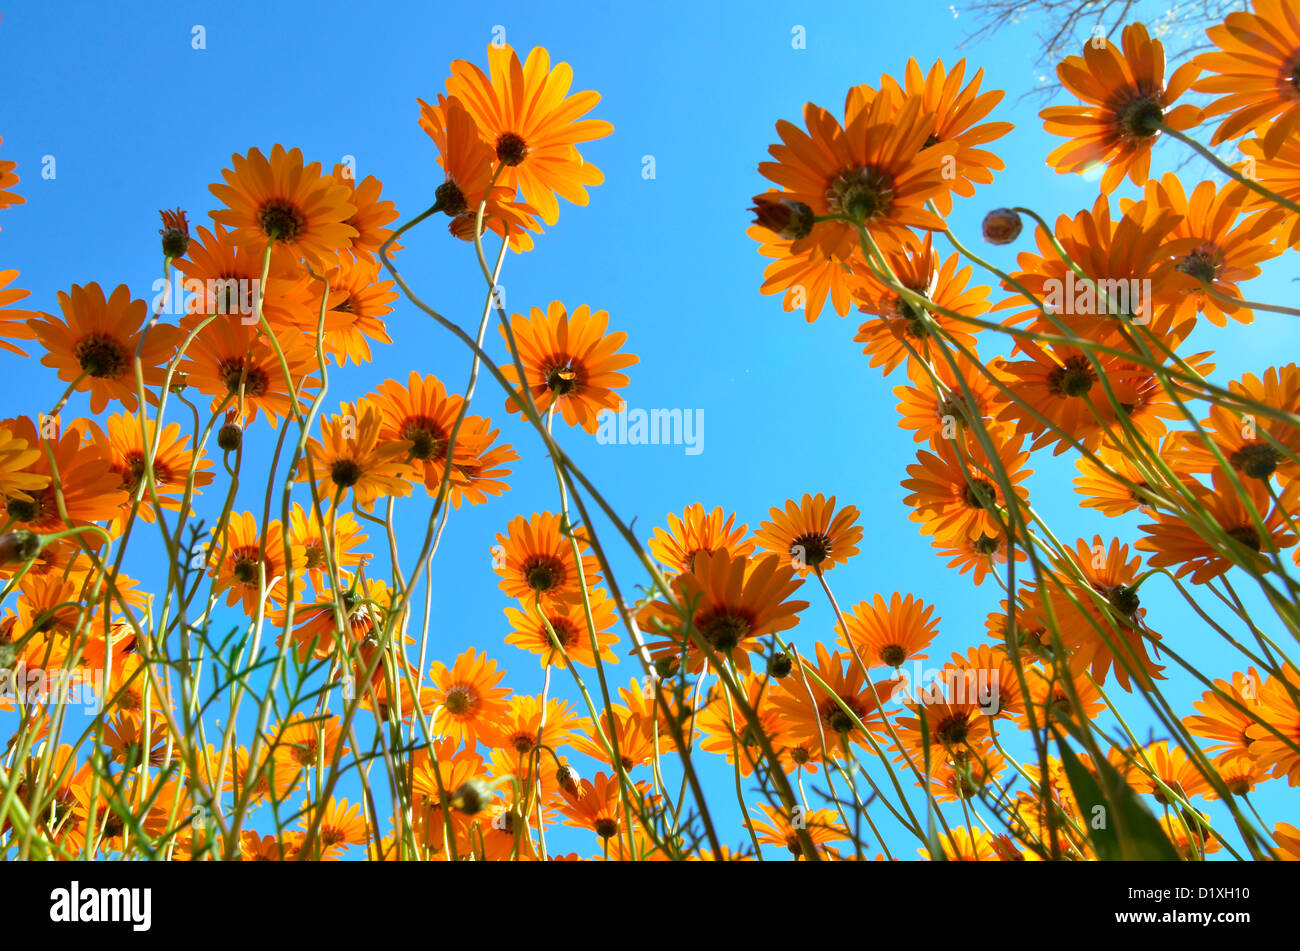 Clump of golden daisies viewed from underneath against blue sky. Namaqualand, South Africa Stock Photo